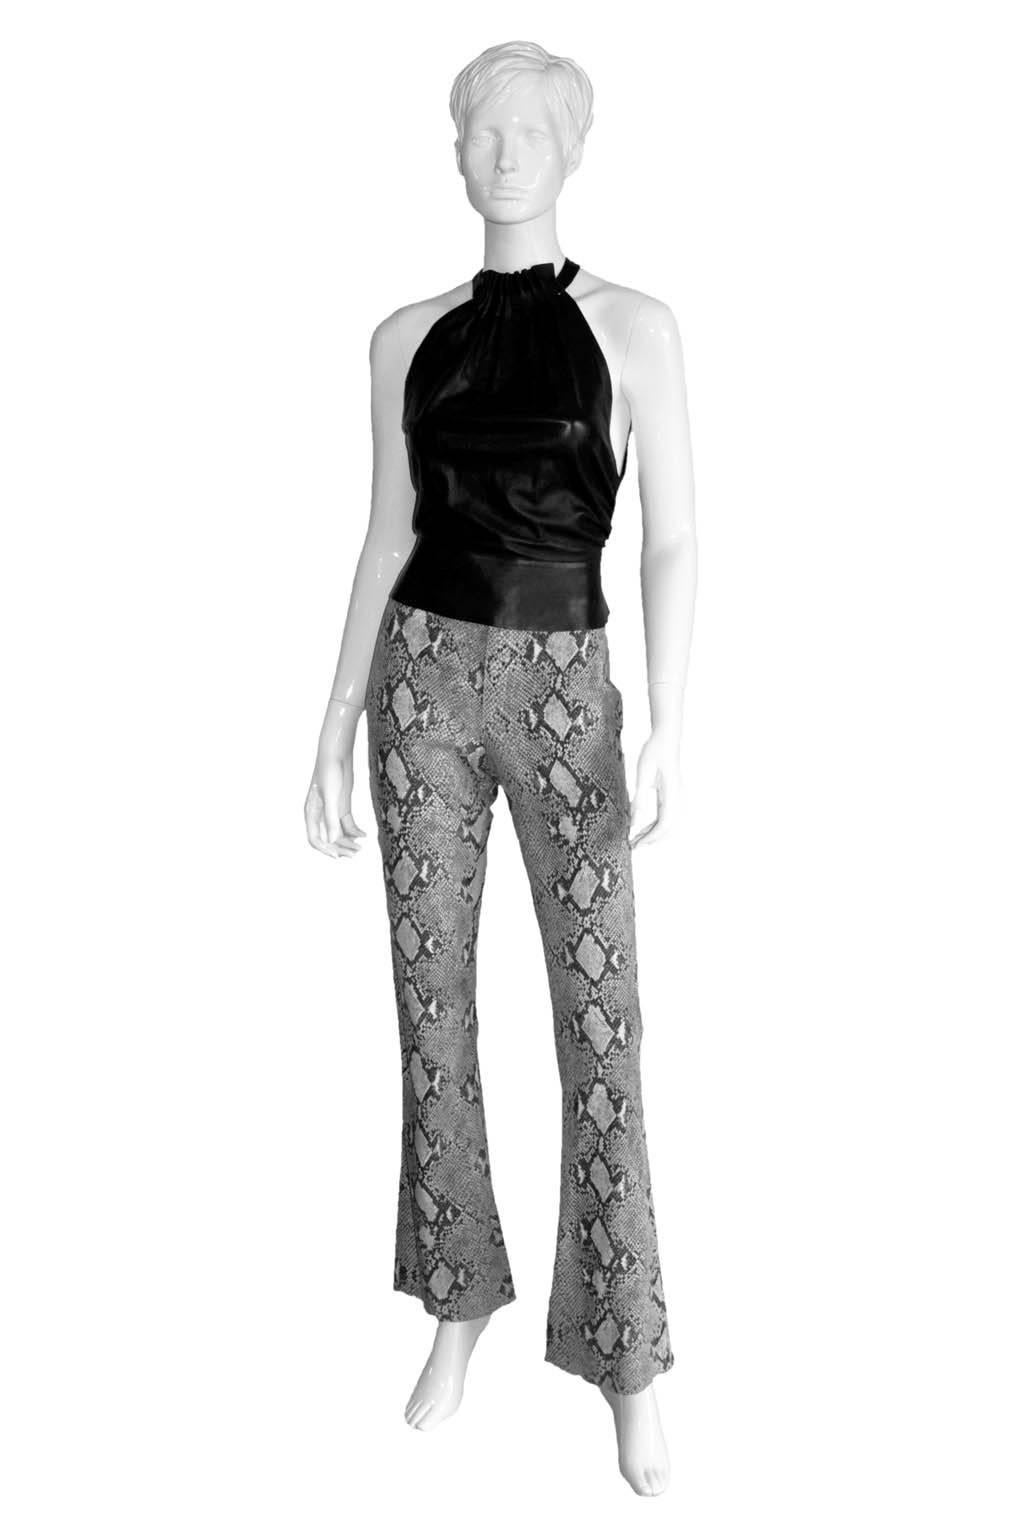 Rare & Iconic Tom Ford For Gucci Spring Summer 2000 Python Print Suede Runway Pants!

Those amazing black & gray python suede runway pants from Tom Ford's gorgeous Spring/Summer 2000 Collection for Gucci! Almost impossible to find these